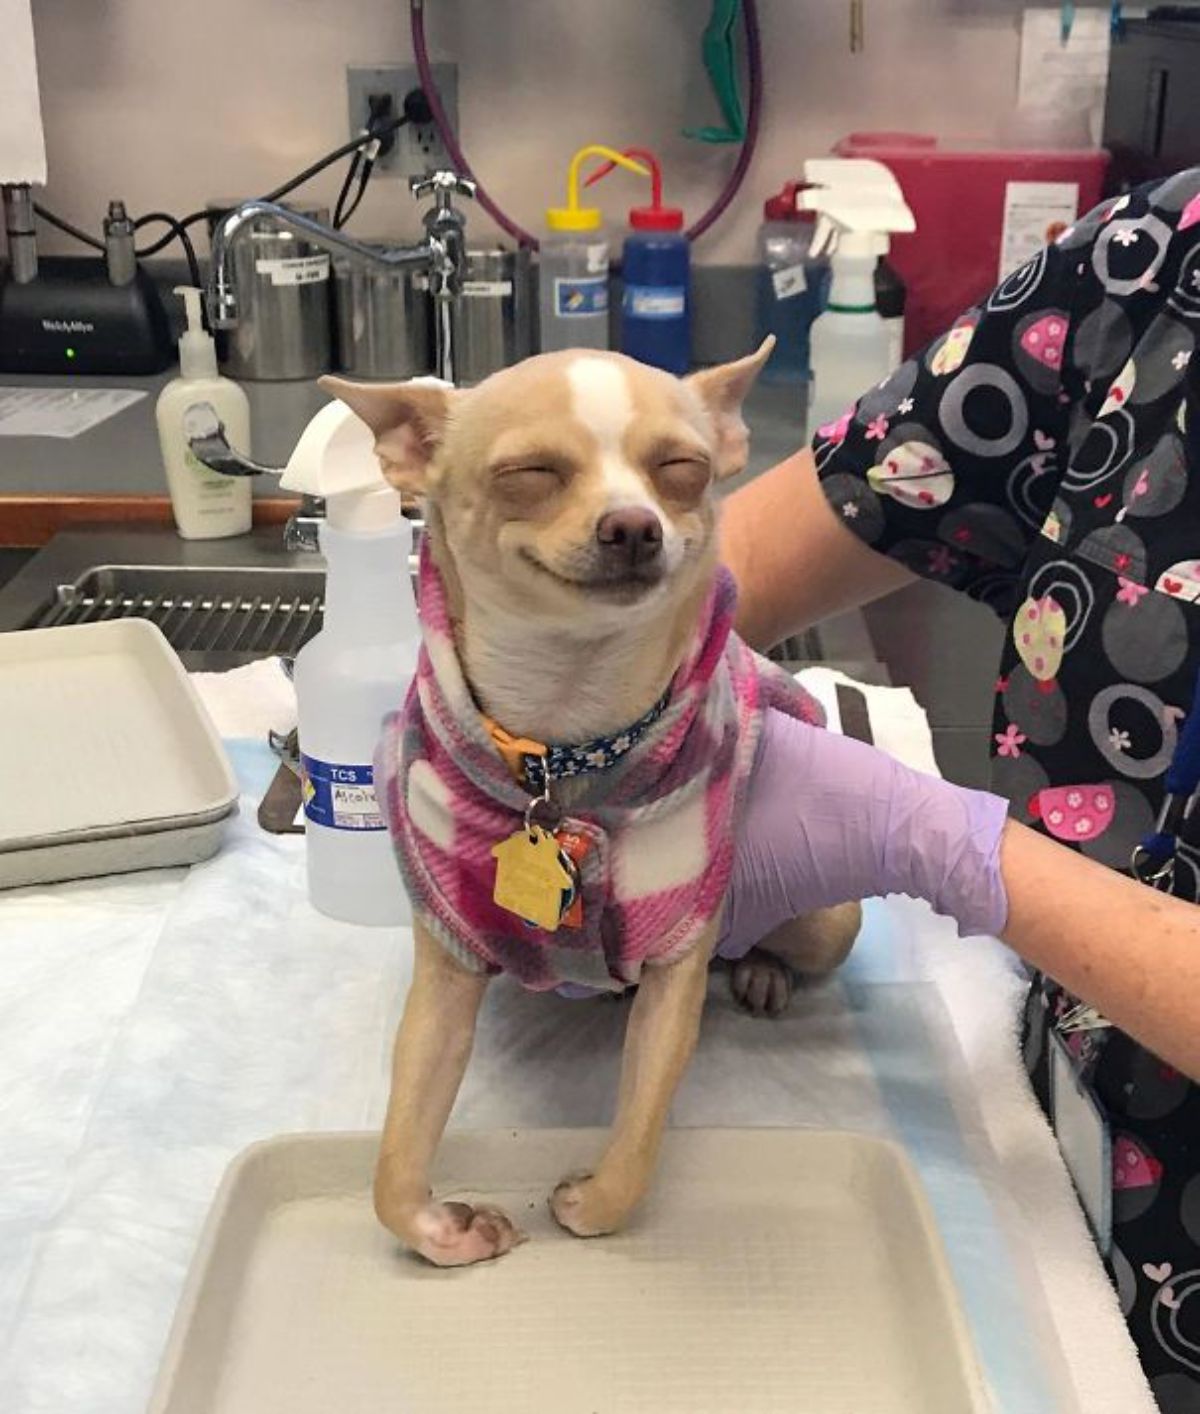 brown and white chihuahua wearing pink and white plaid shirt held by someone on a vet table with dog smiling with eyes closed